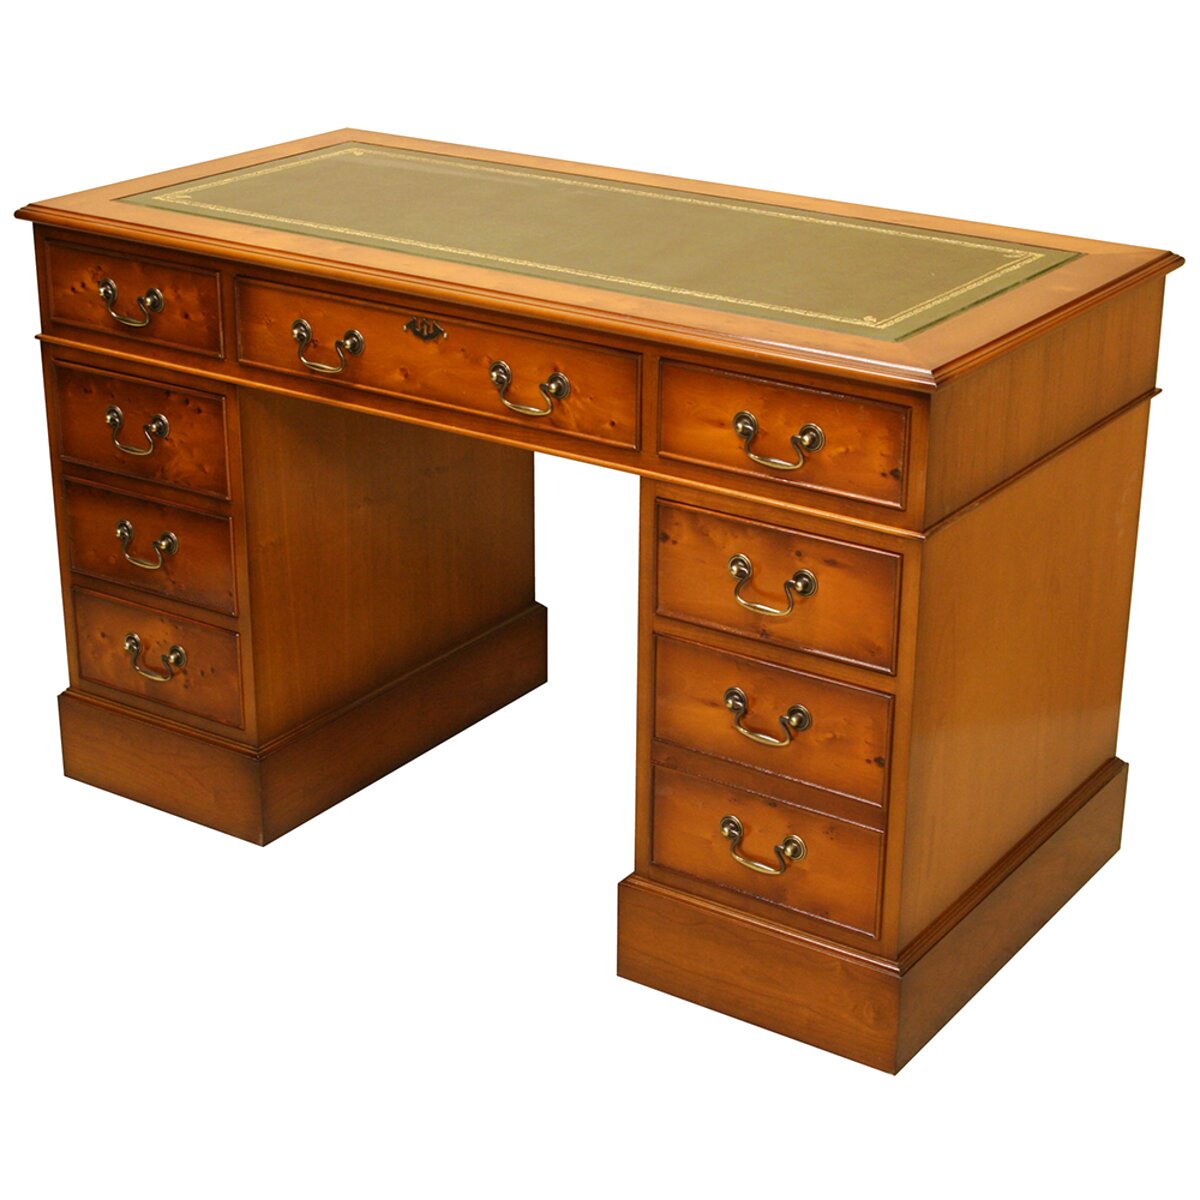 Yew Desk For Sale In Uk 61 Second Hand Yew Desks